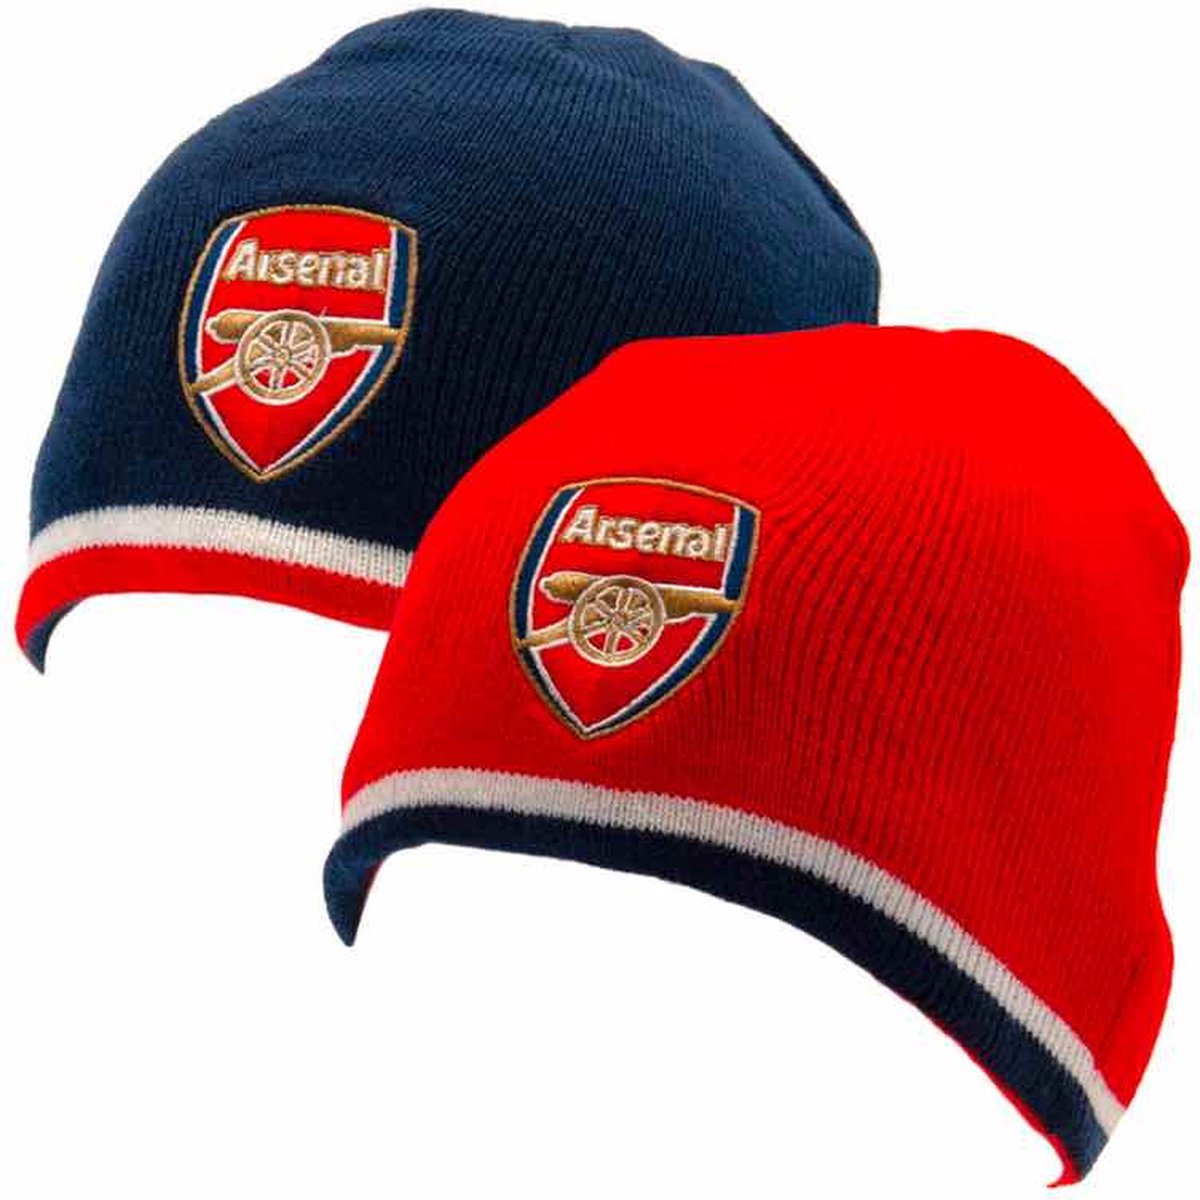 Arsenal Reversible Knitted Hat